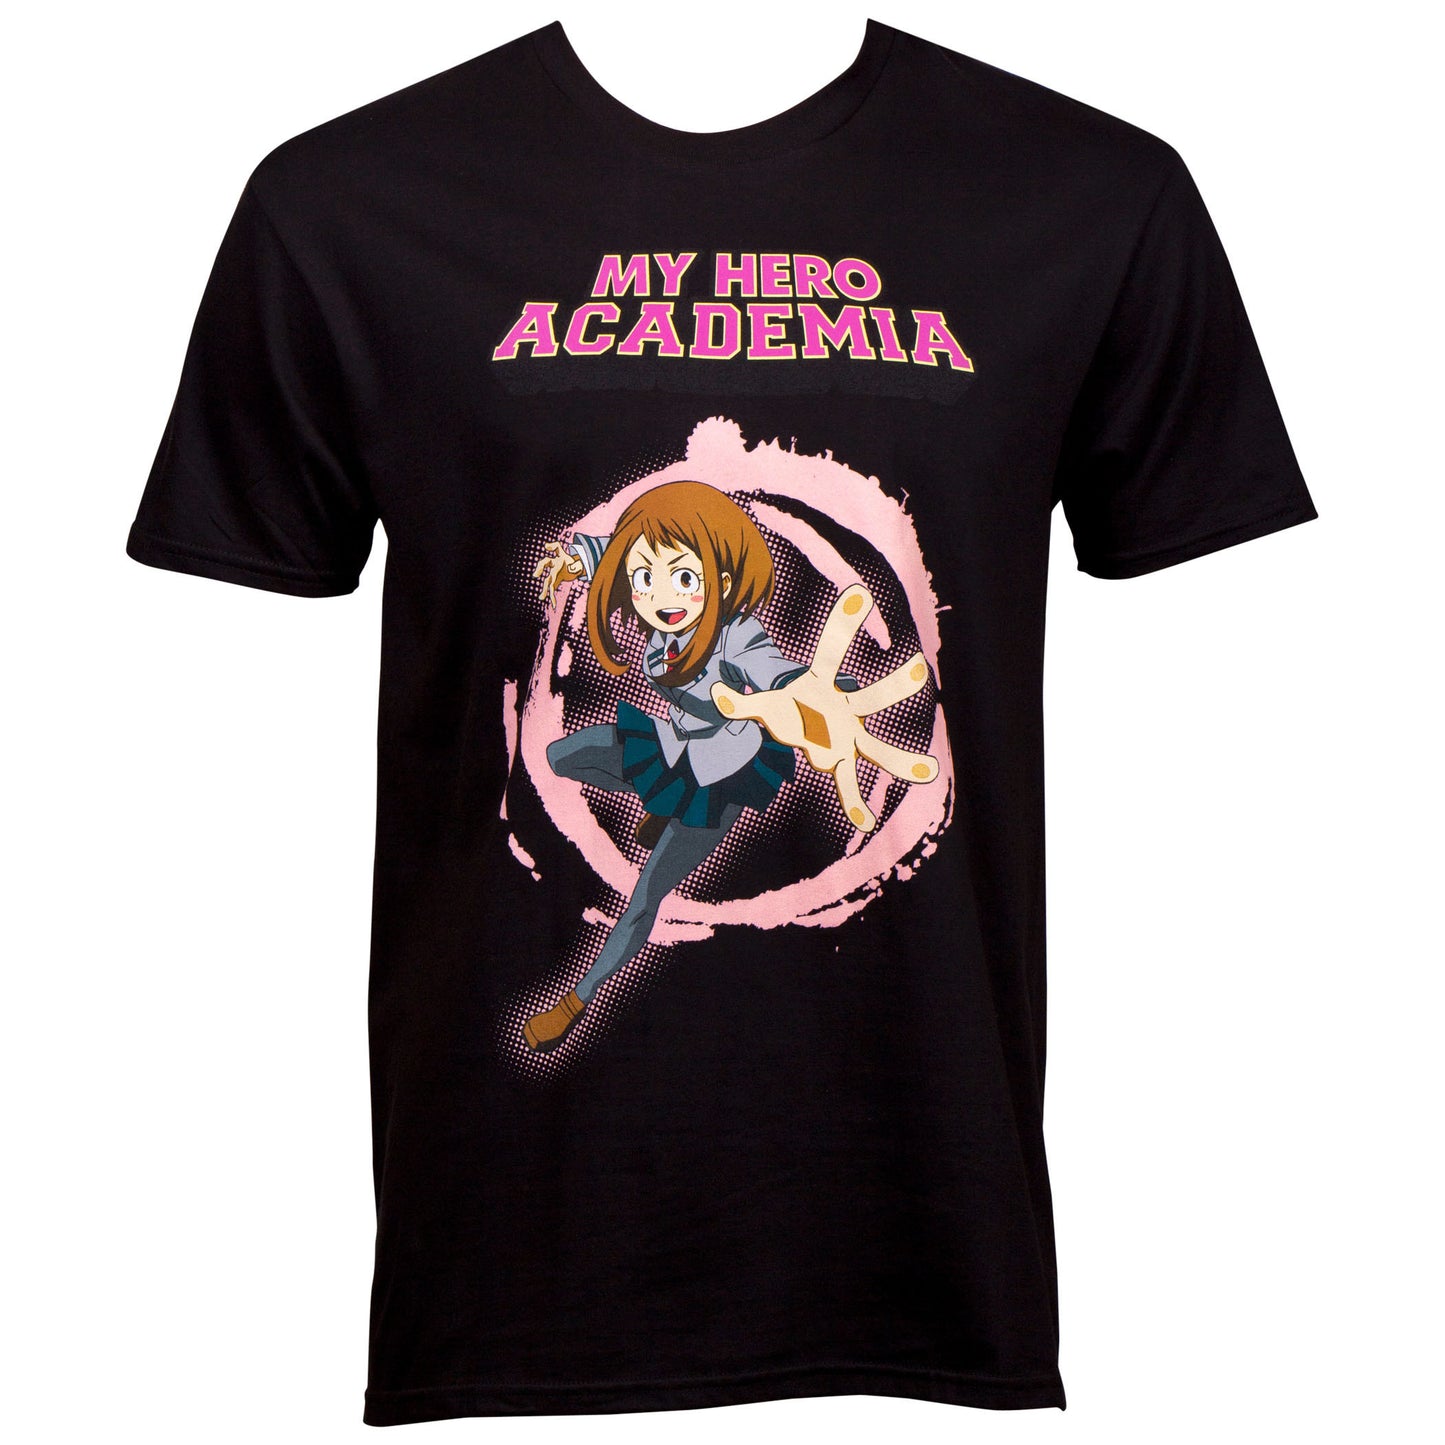 "Everyone is giving all they can, which only makes it fair that I do the same." - Ochaco Uraraka (Uravity)  Celebrate your love for UA High and all things My Hero Academia with this black cotton Ochaco t-shirt.   Details: Cotton blend Unisex fit black tshirt Official My Hero Academia / Boko No Hero apparel